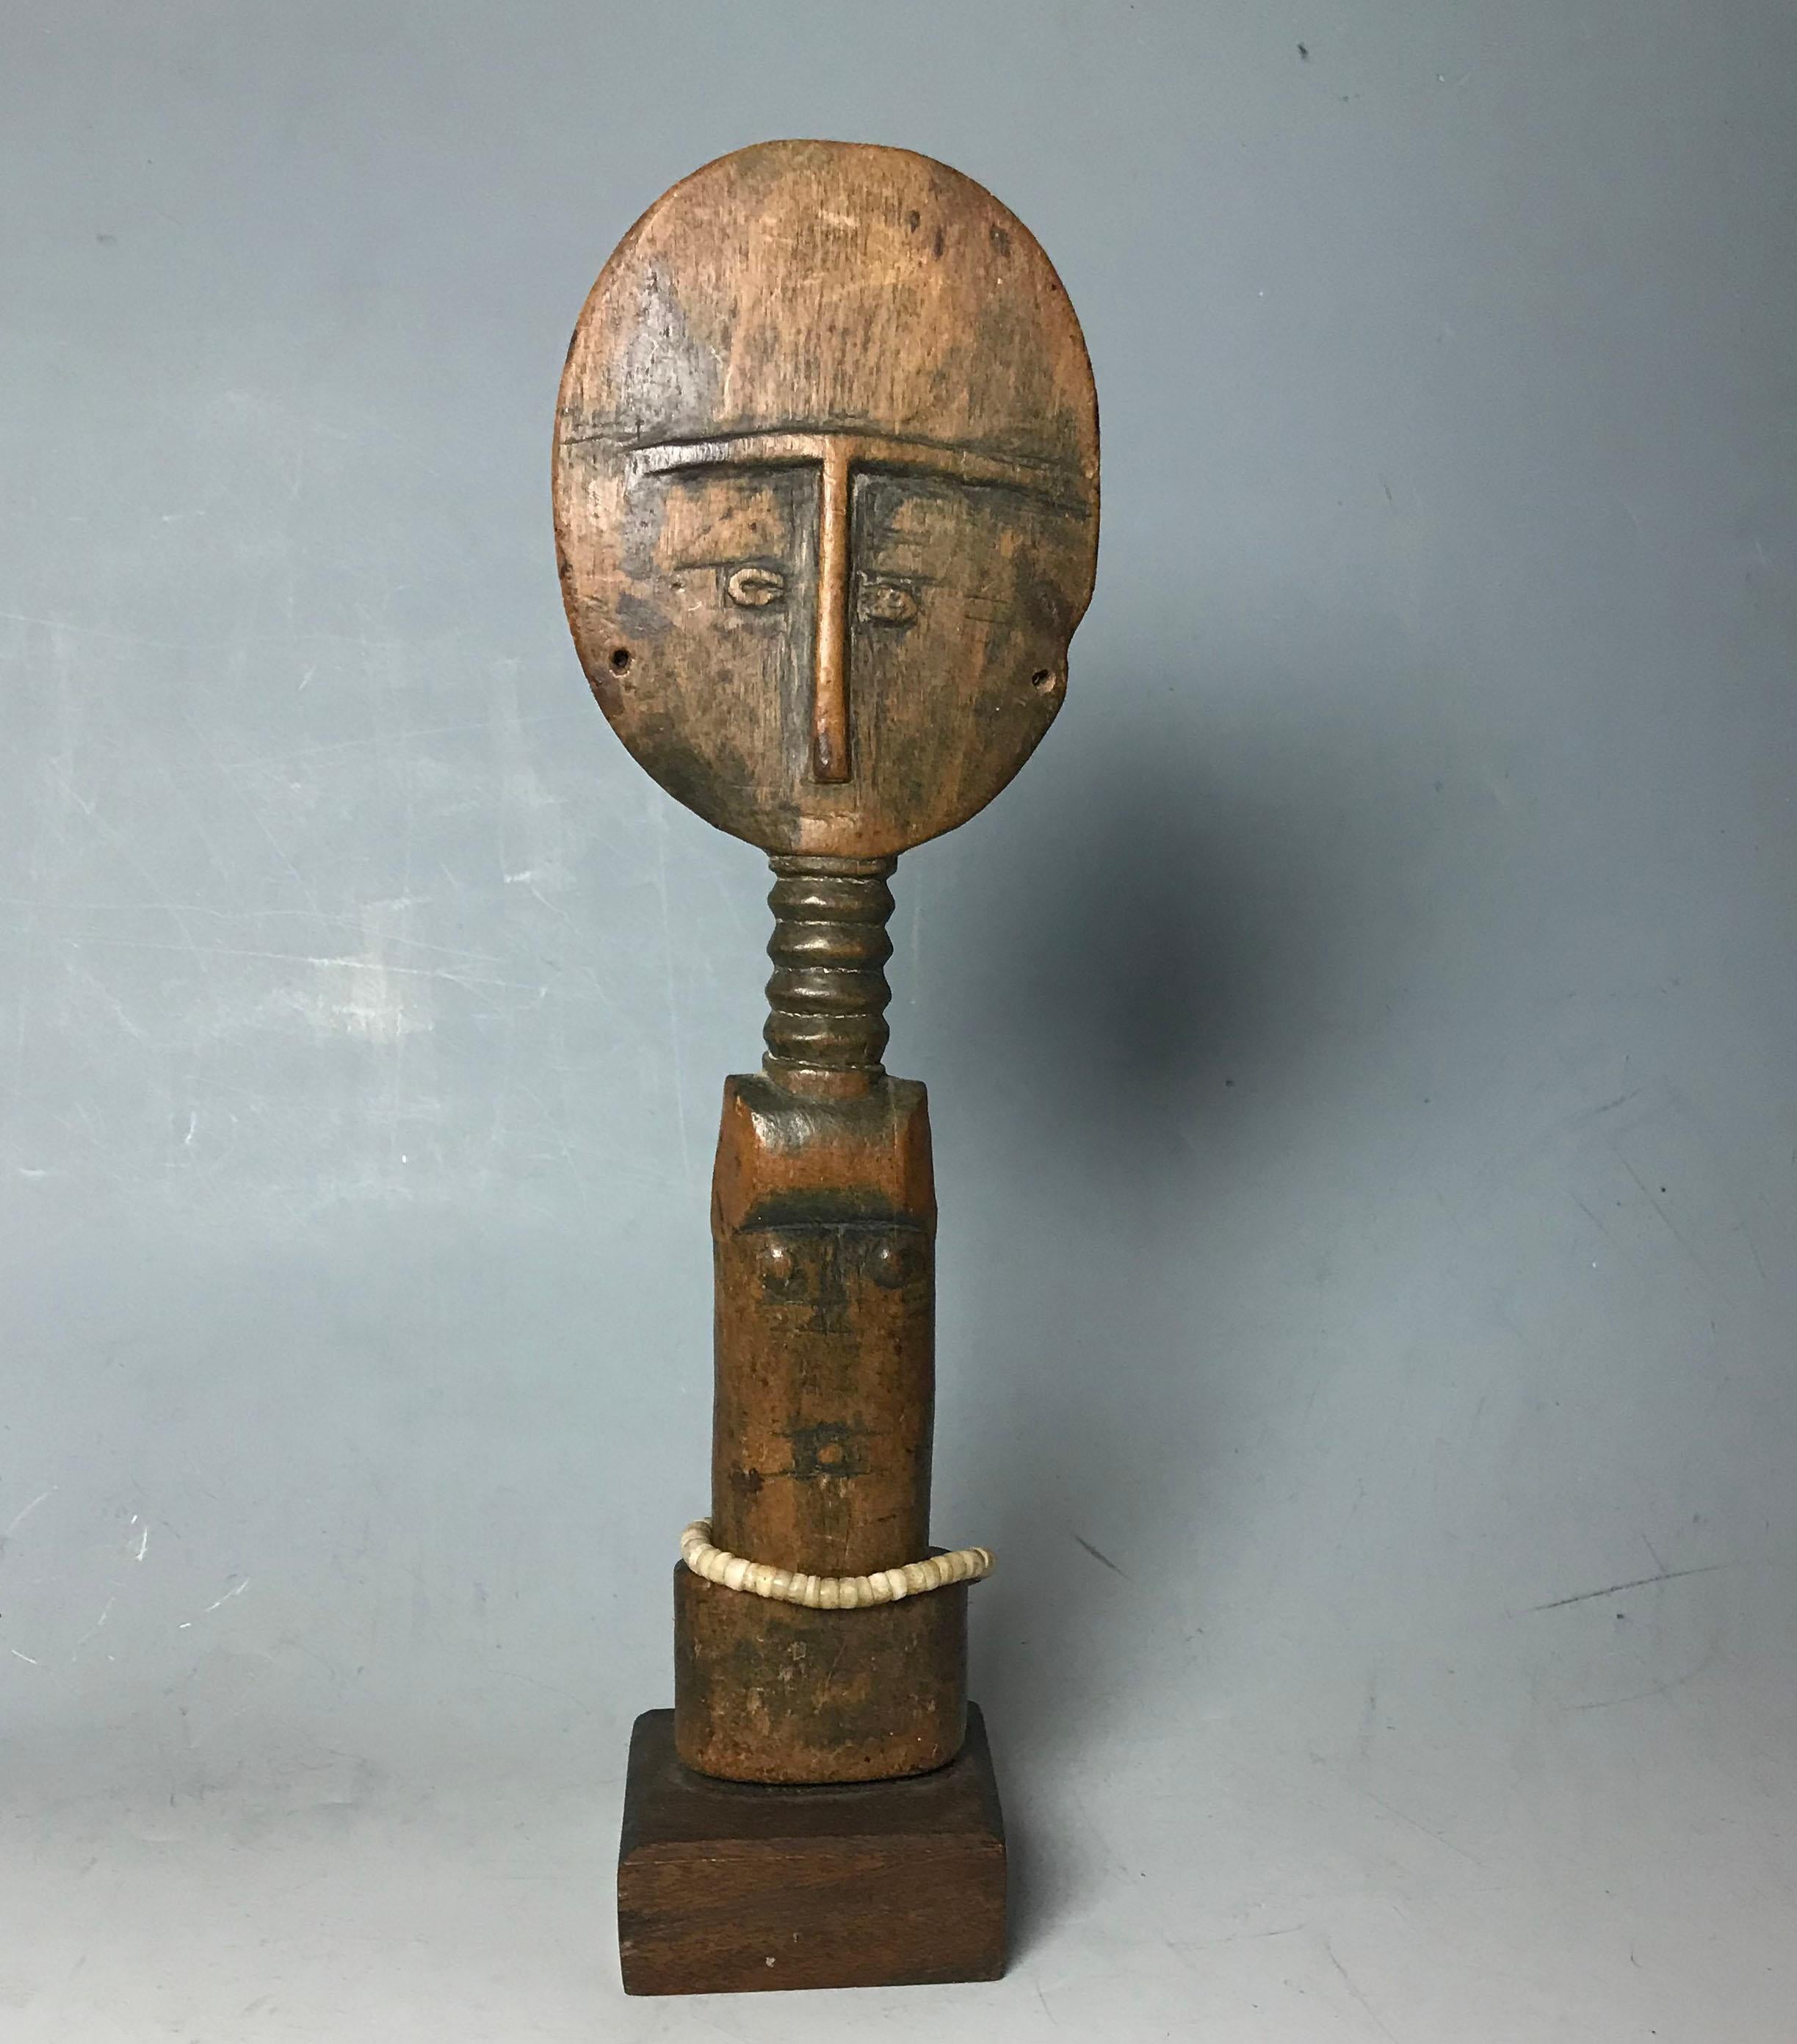 A fine Old Ashanti fertility Doll Akua'ba figure.
 
A aged figure with honey patina disc shaped head with T shaped features, carved in shallow relief, the upper body with ridged neck, old label on back.
Measure: height 31 cm.
Ex UK